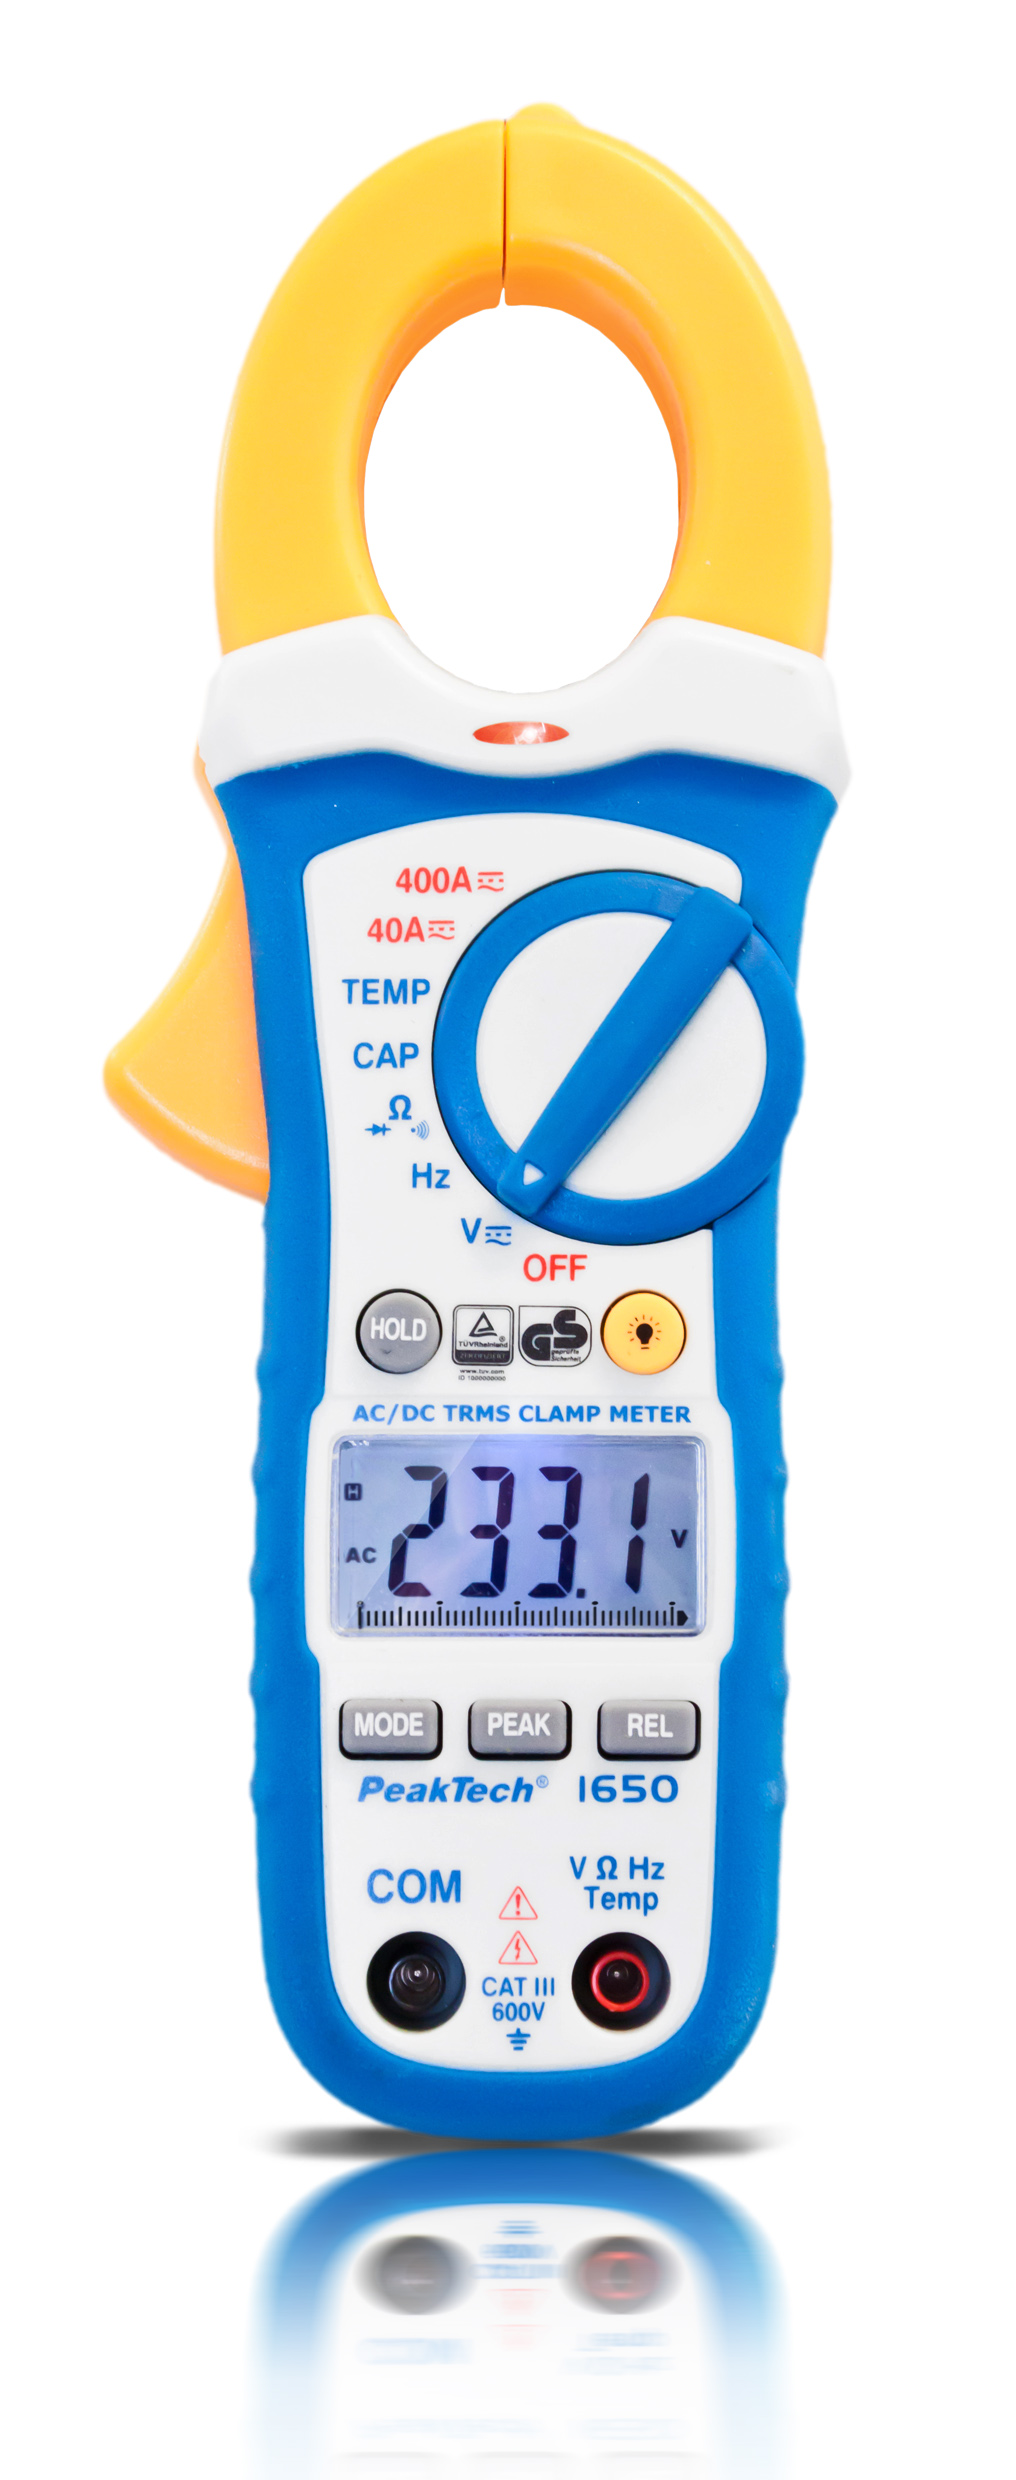 «PeakTech® P 1650» TrueRMS clamp meter 4,000 counts 400 A AC/DC